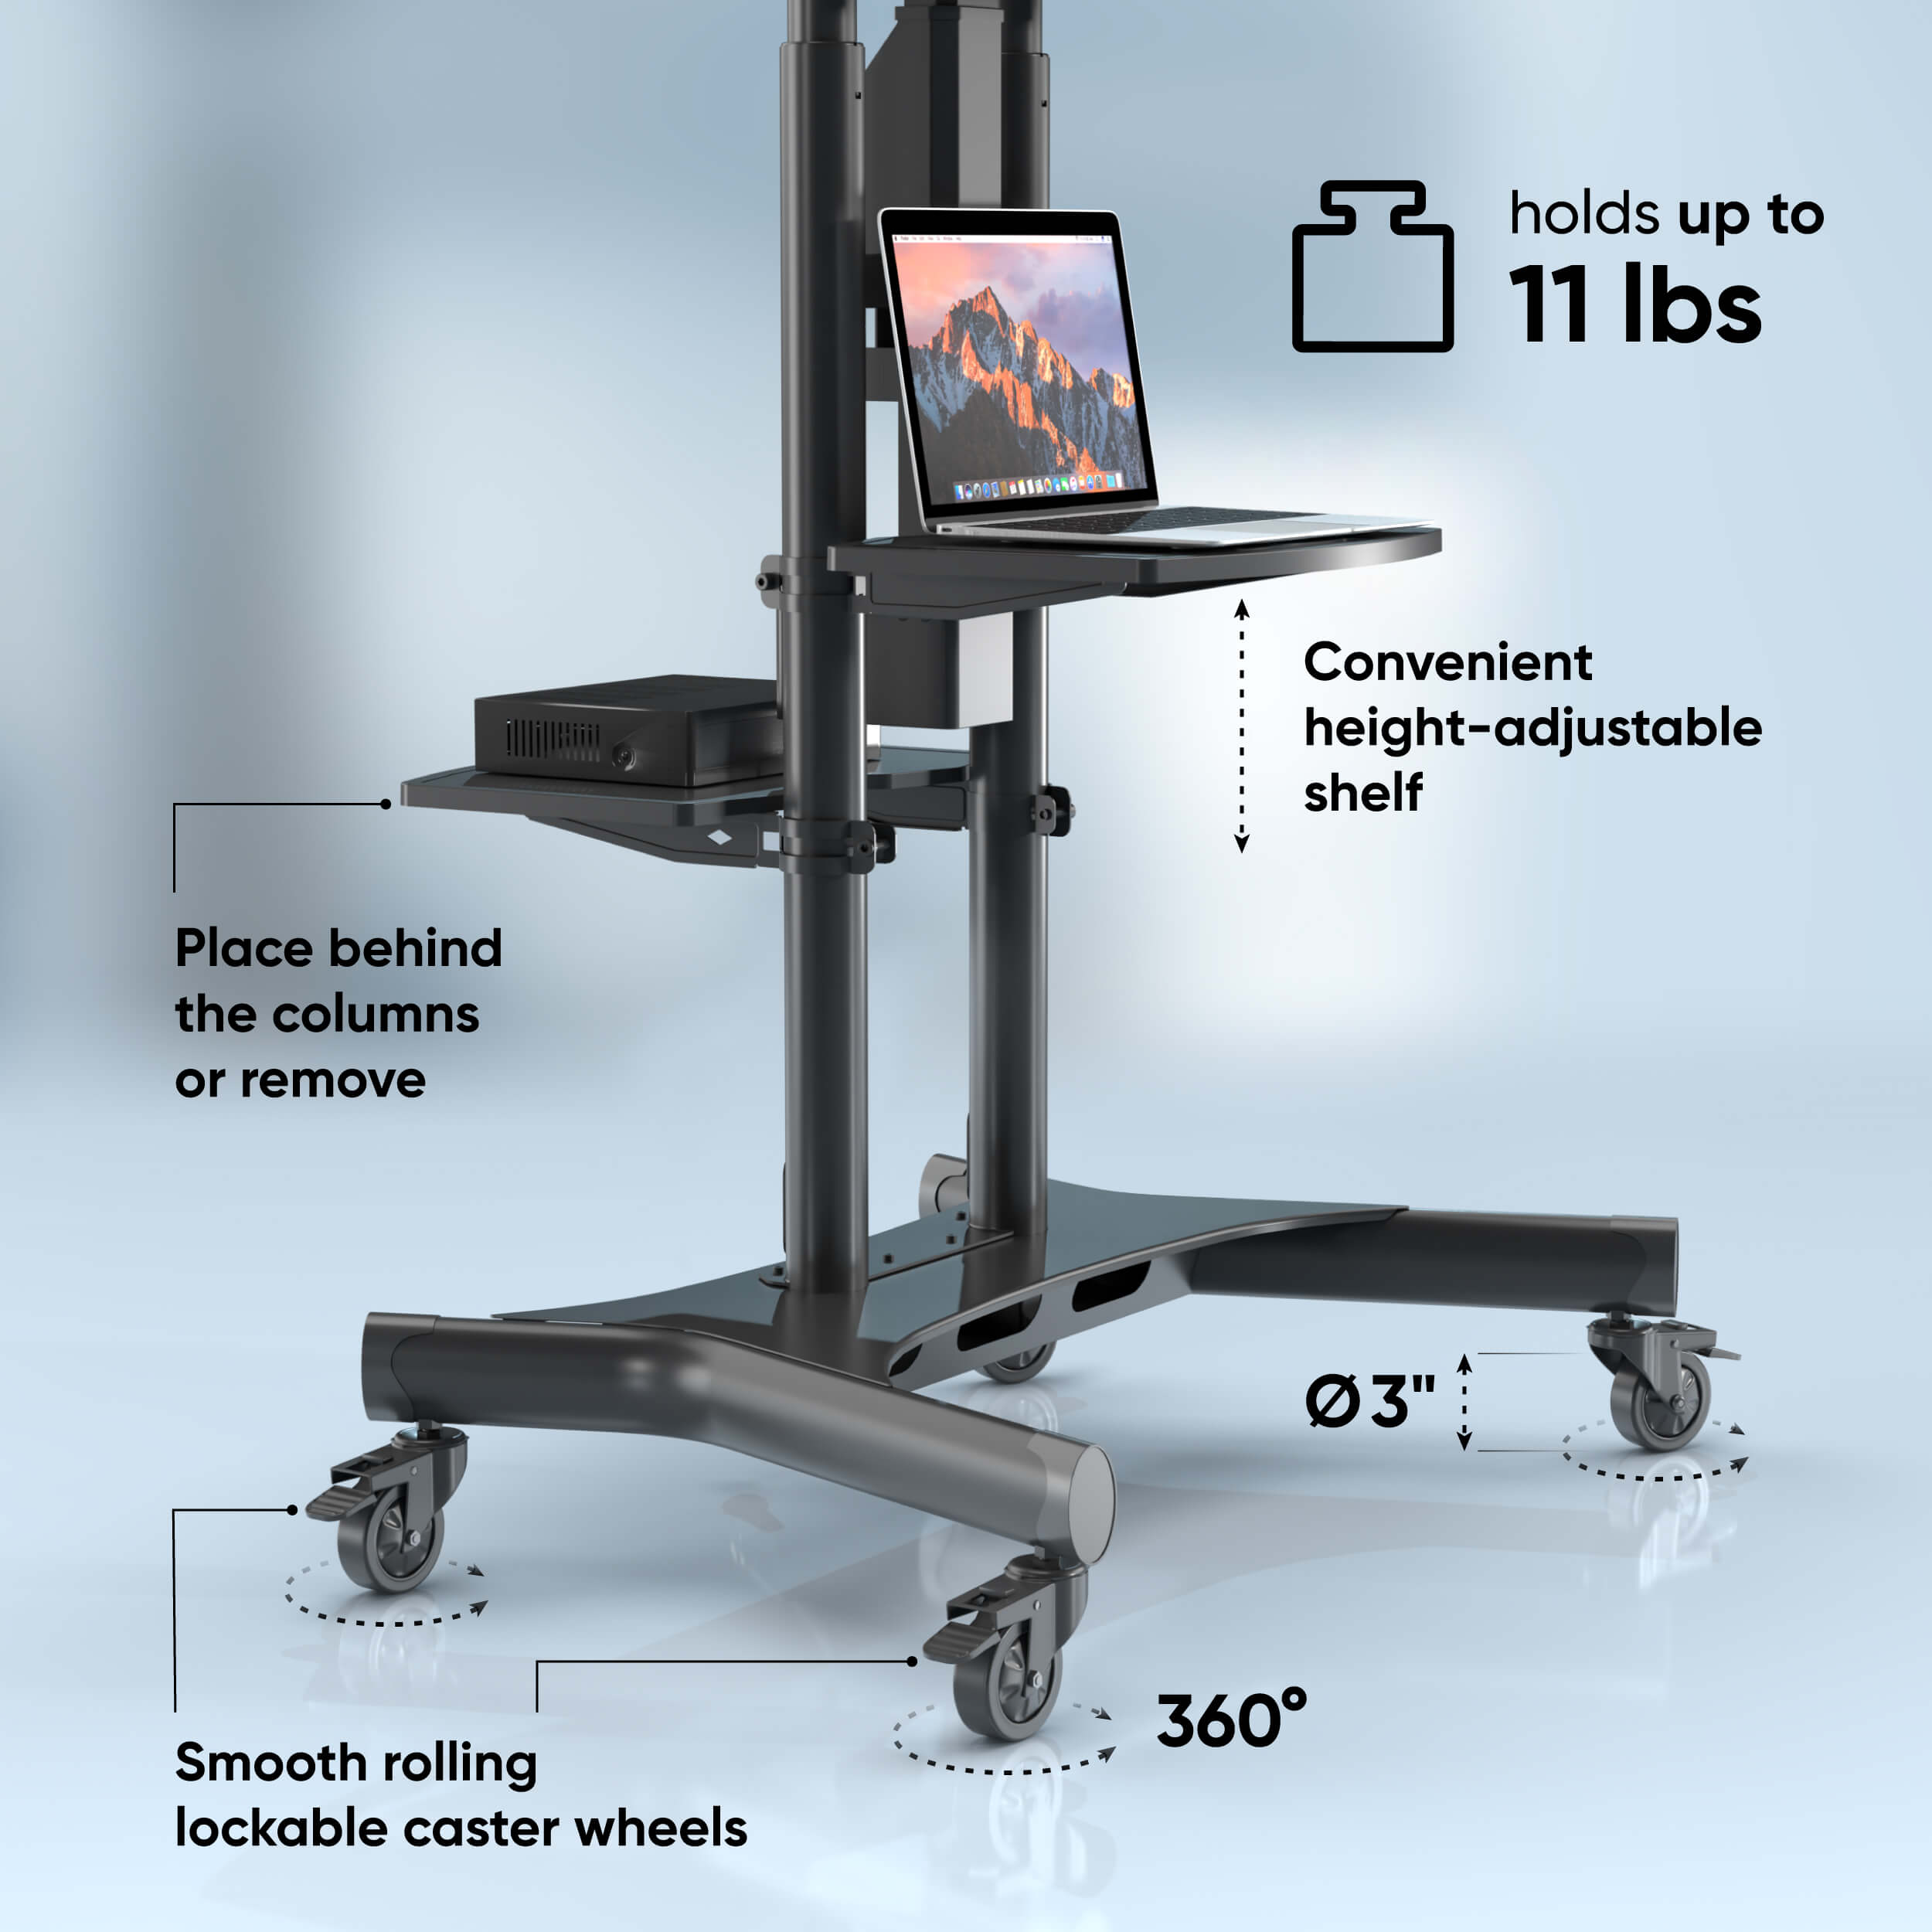 Motorized TV Lift w/ Remote Control Mobile TV Stand for 50-86" TVs up to 233 lbs ONKRON TS1881 eLift